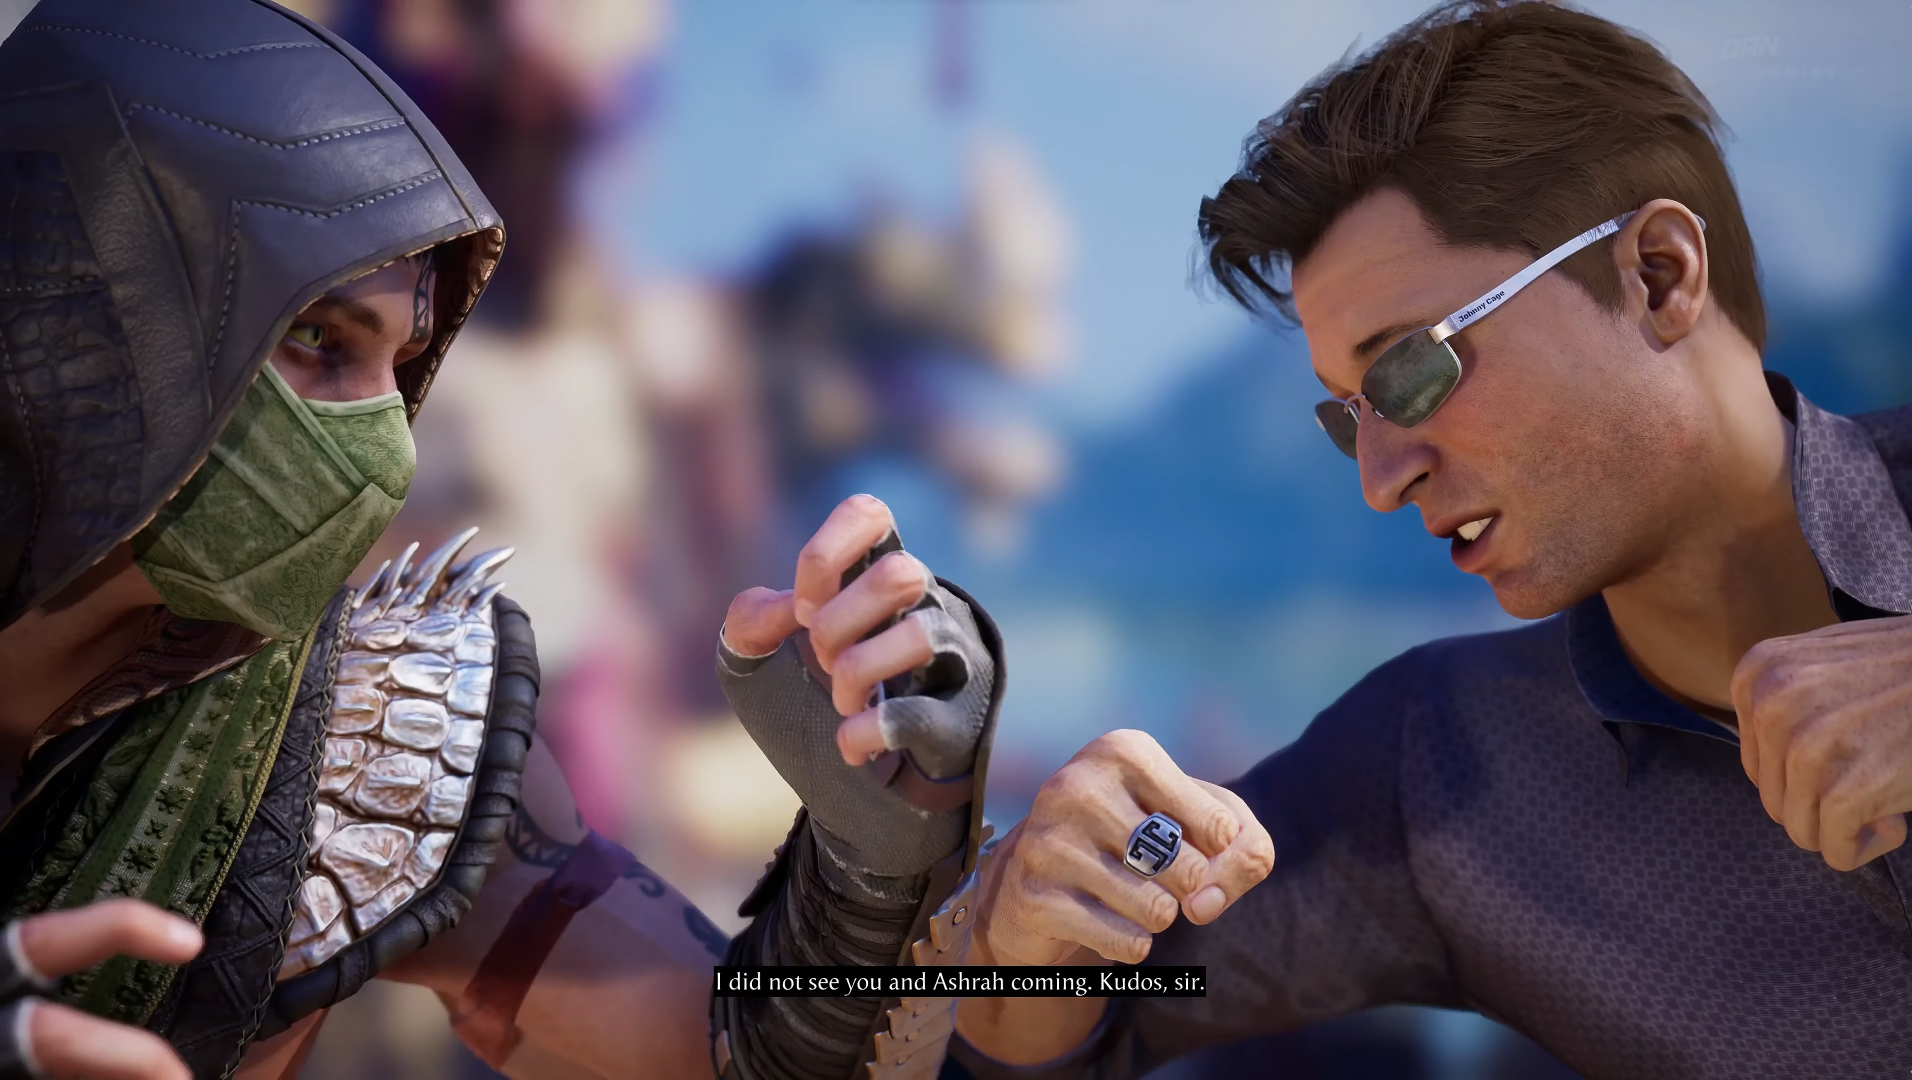 Reptile (left) Vs. Johnny Cage (right) speaking before a fight